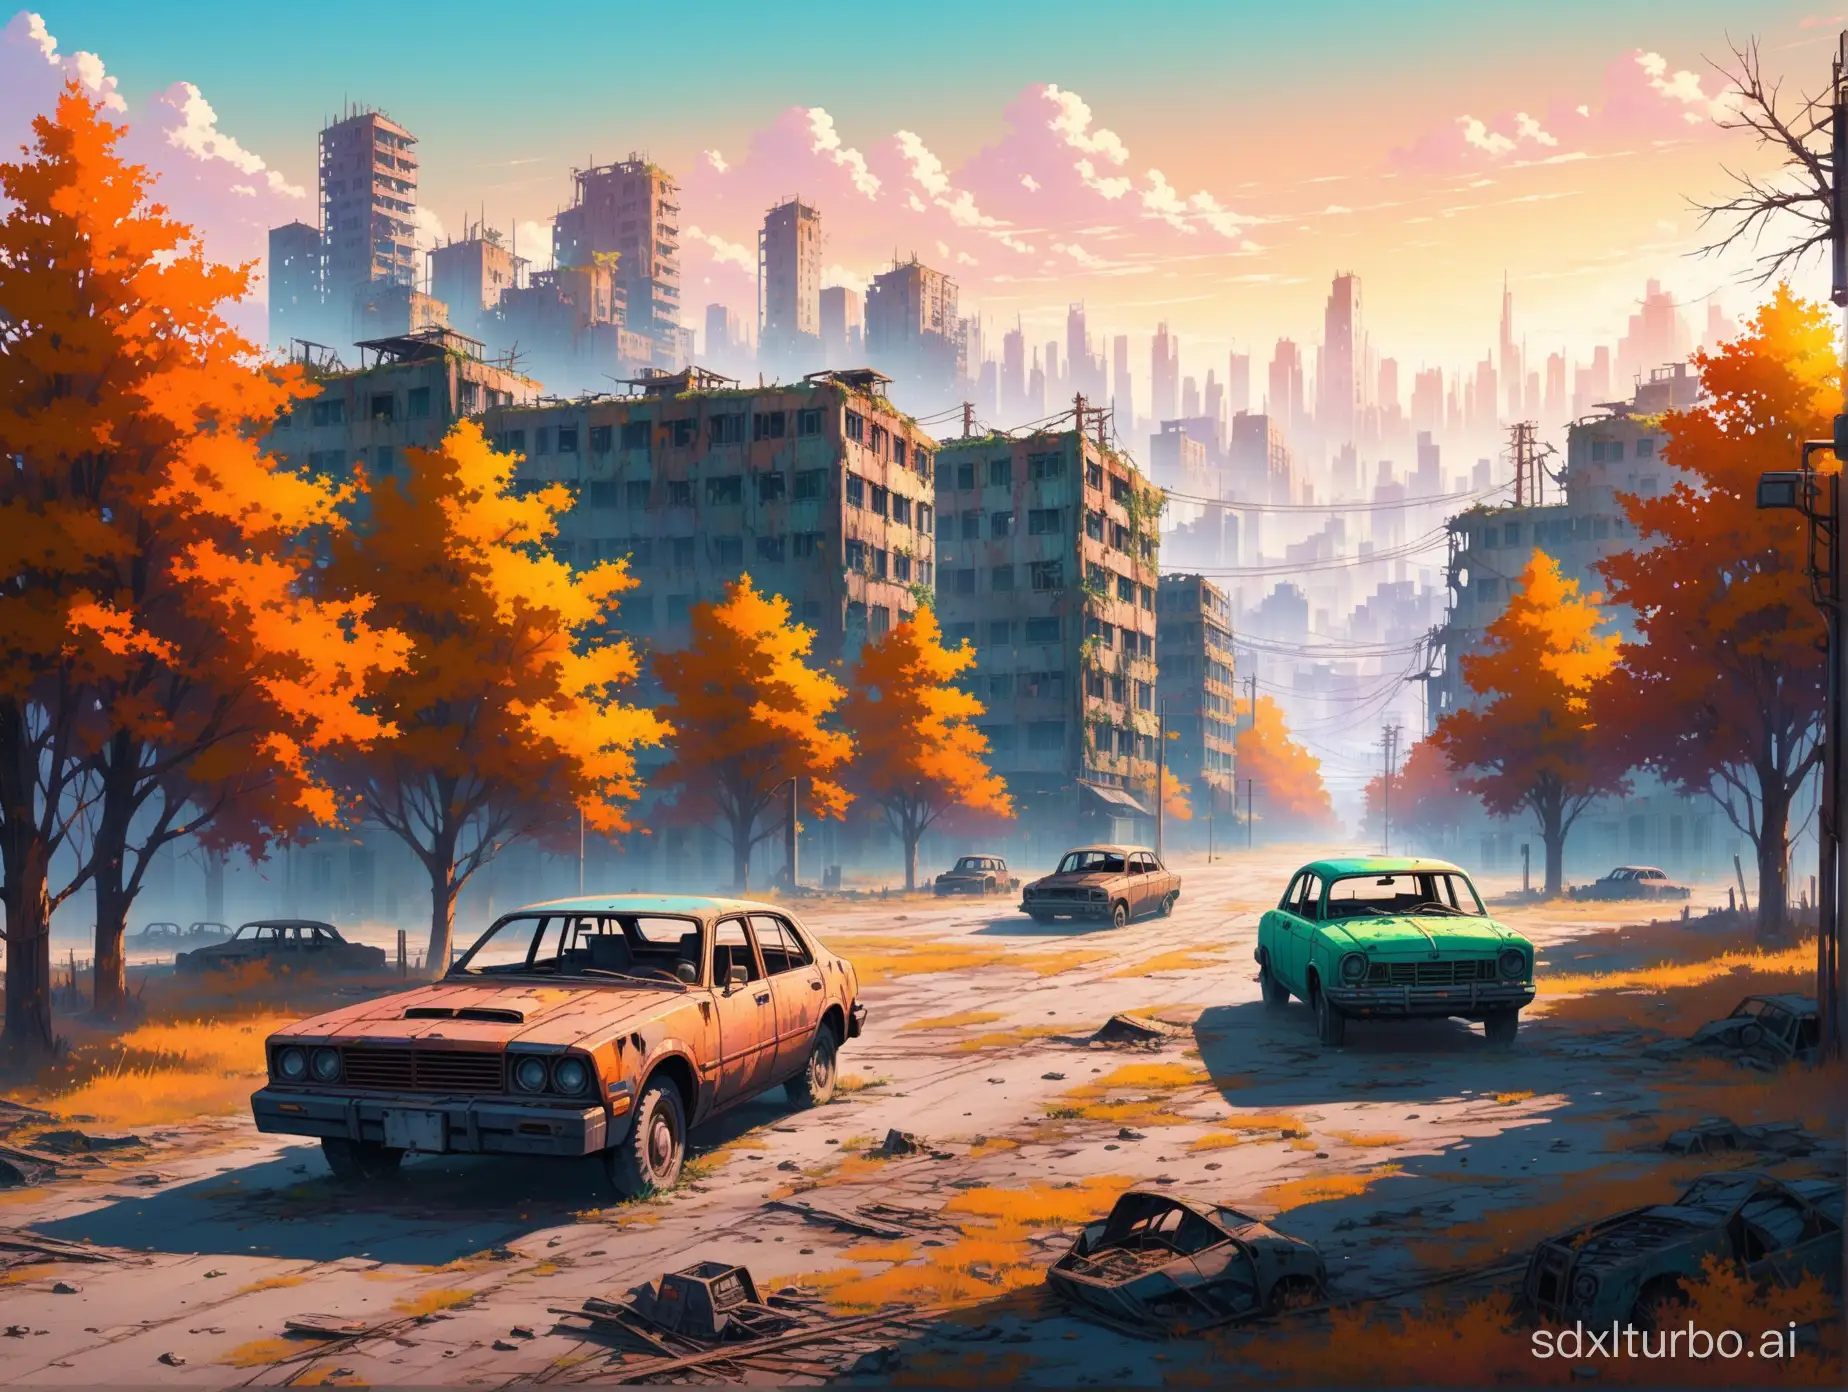 Colorful-PostApocalyptic-Cityscape-with-Abandoned-Car-and-Overgrown-Trees